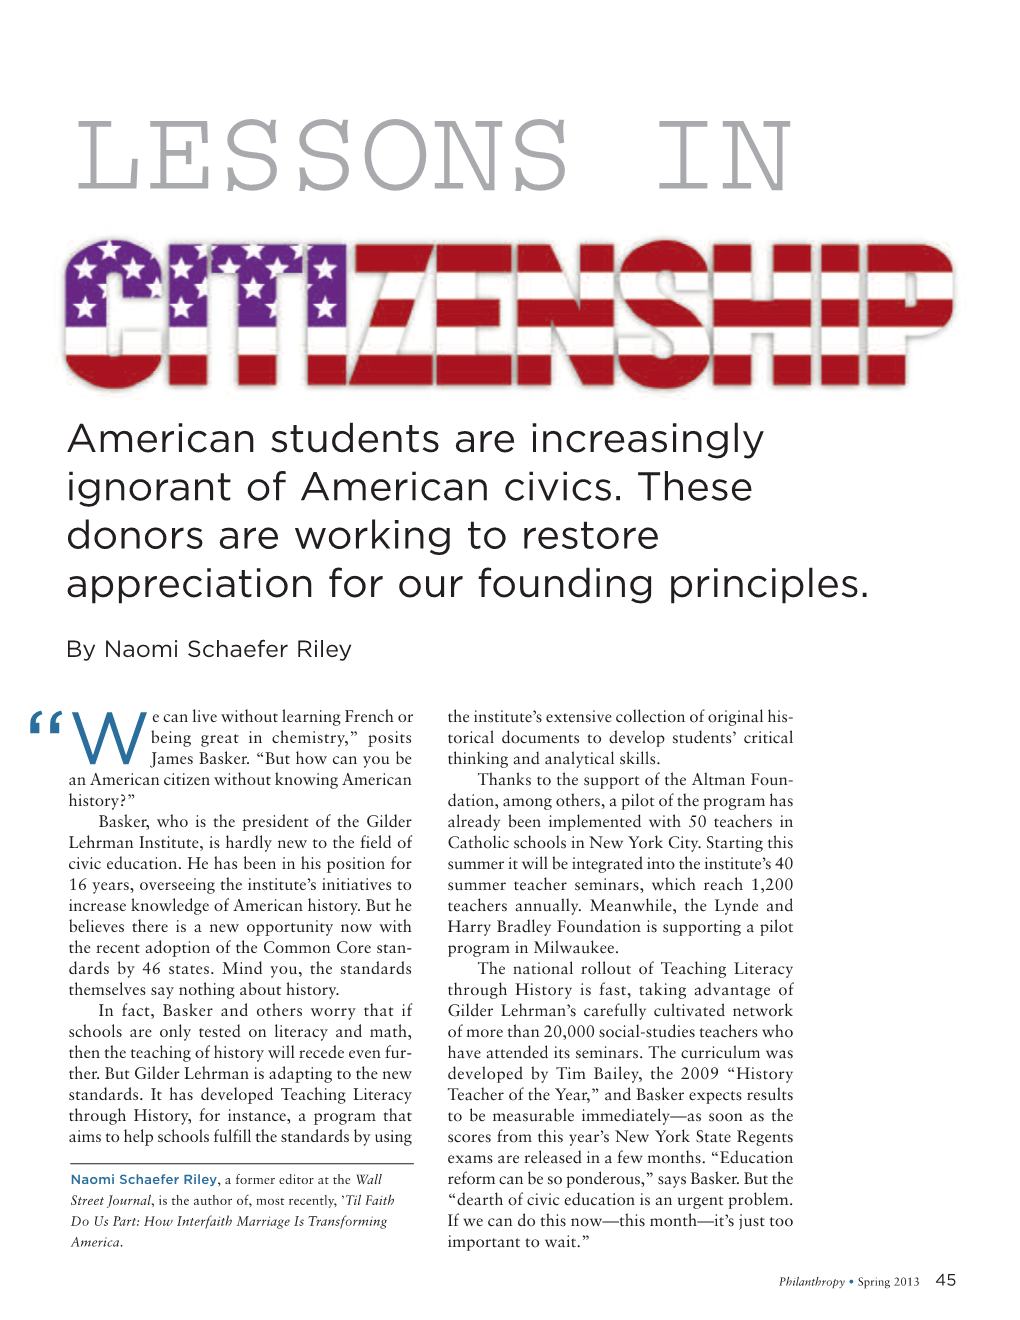 American Students Are Increasingly Ignorant of American Civics. These Donors Are Working to Restore Appreciation for Our Founding Principles